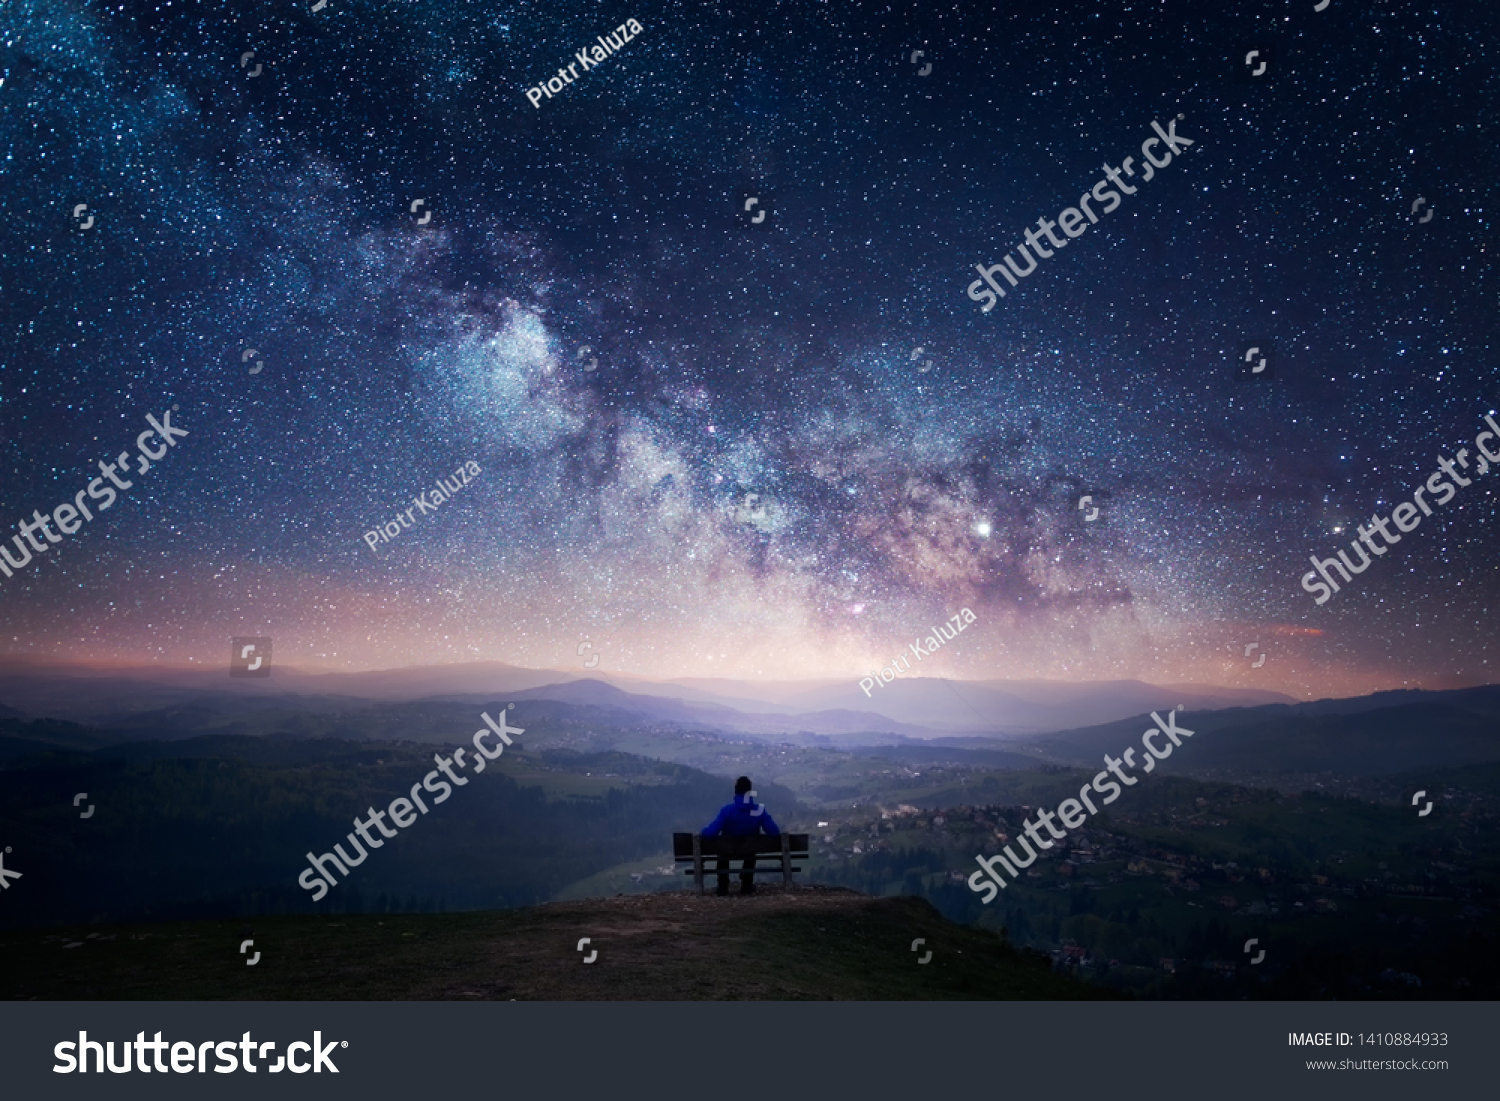 A man sitting on a bench staring at a starry sky with a Milky Way and a mountain landscape #1410884933